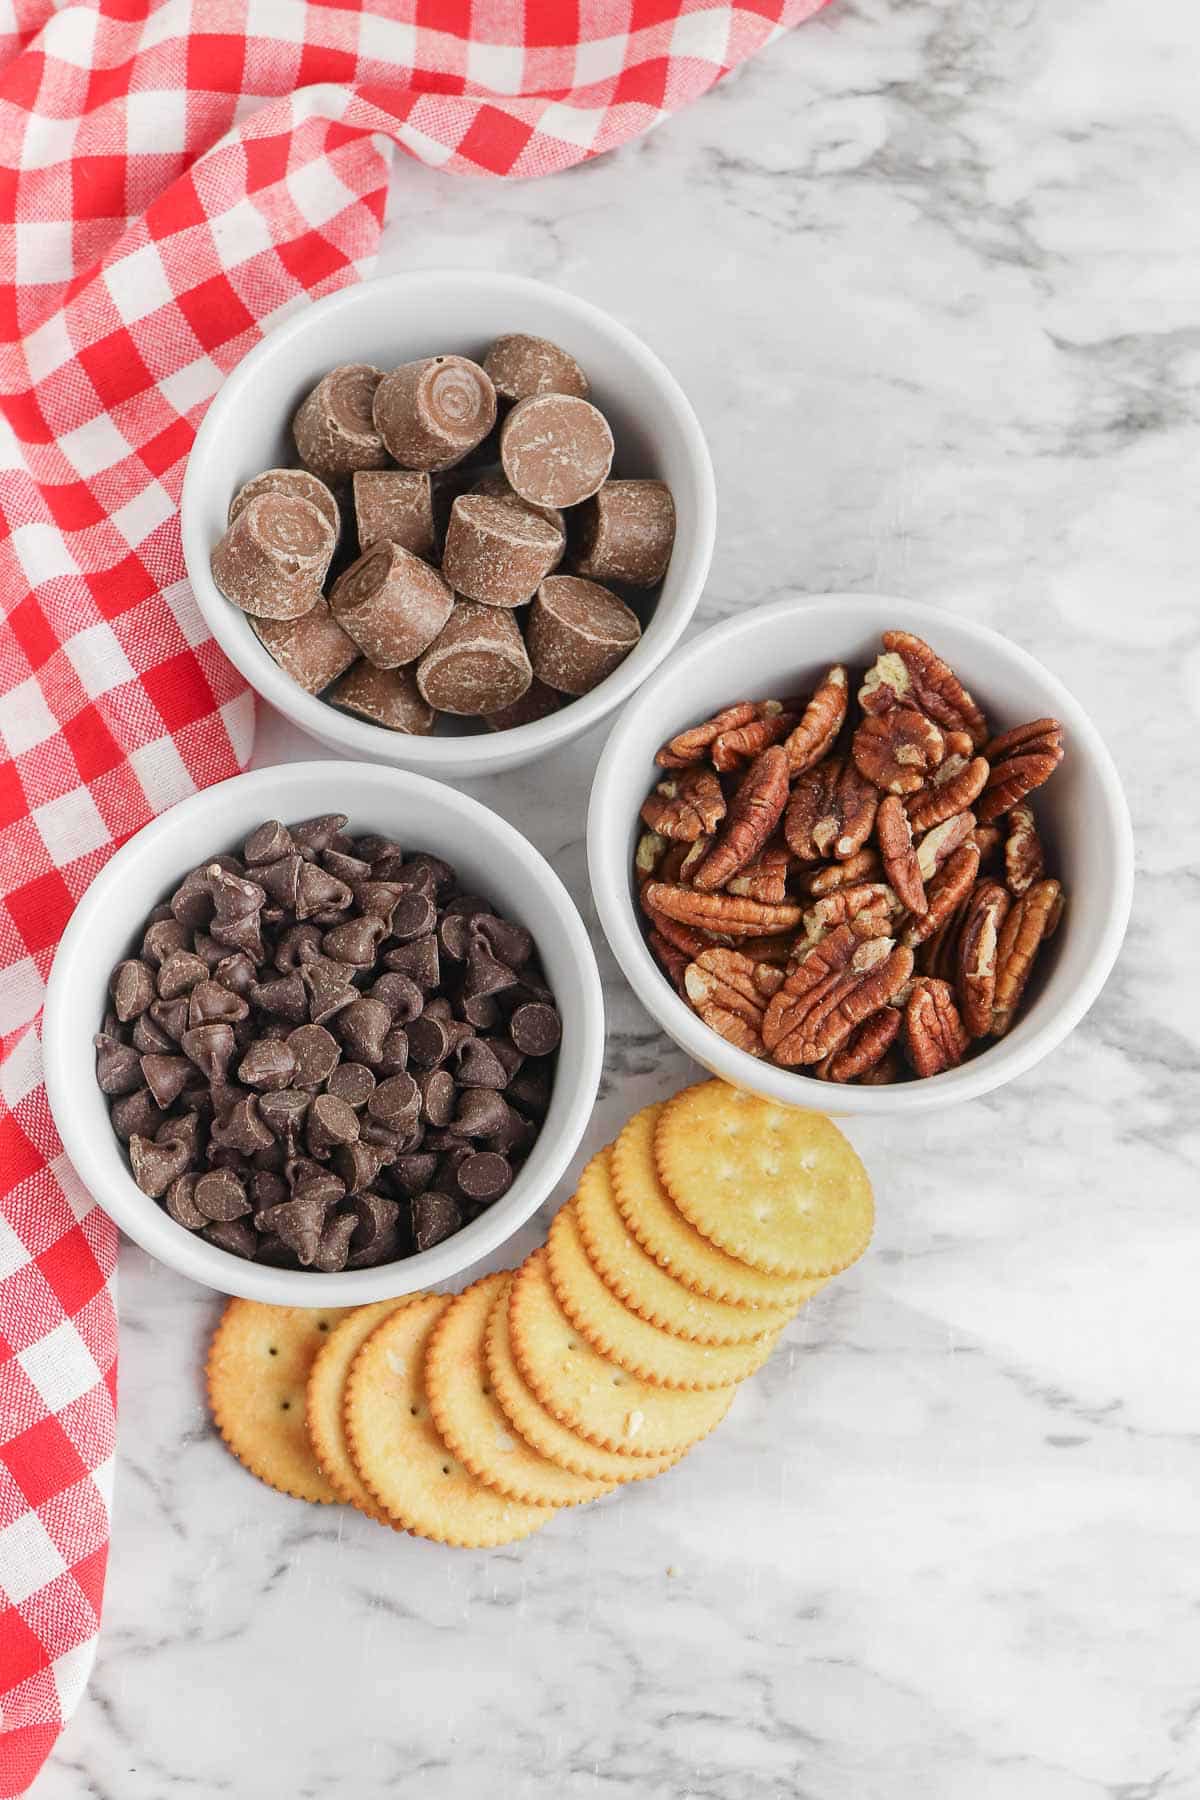 Three bowls of chocolate chips, pecans and chocolate chips and several ritz crackers on a marble table.